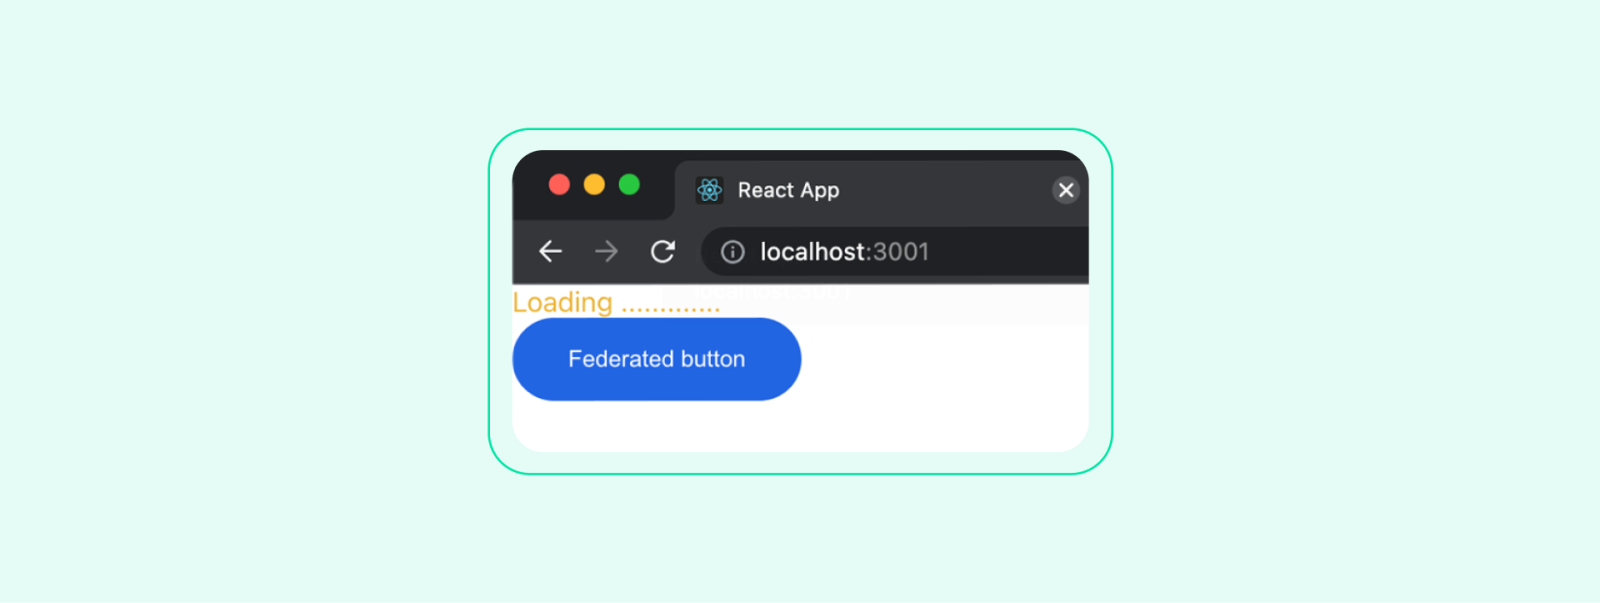 Loading a federated button in a React app.